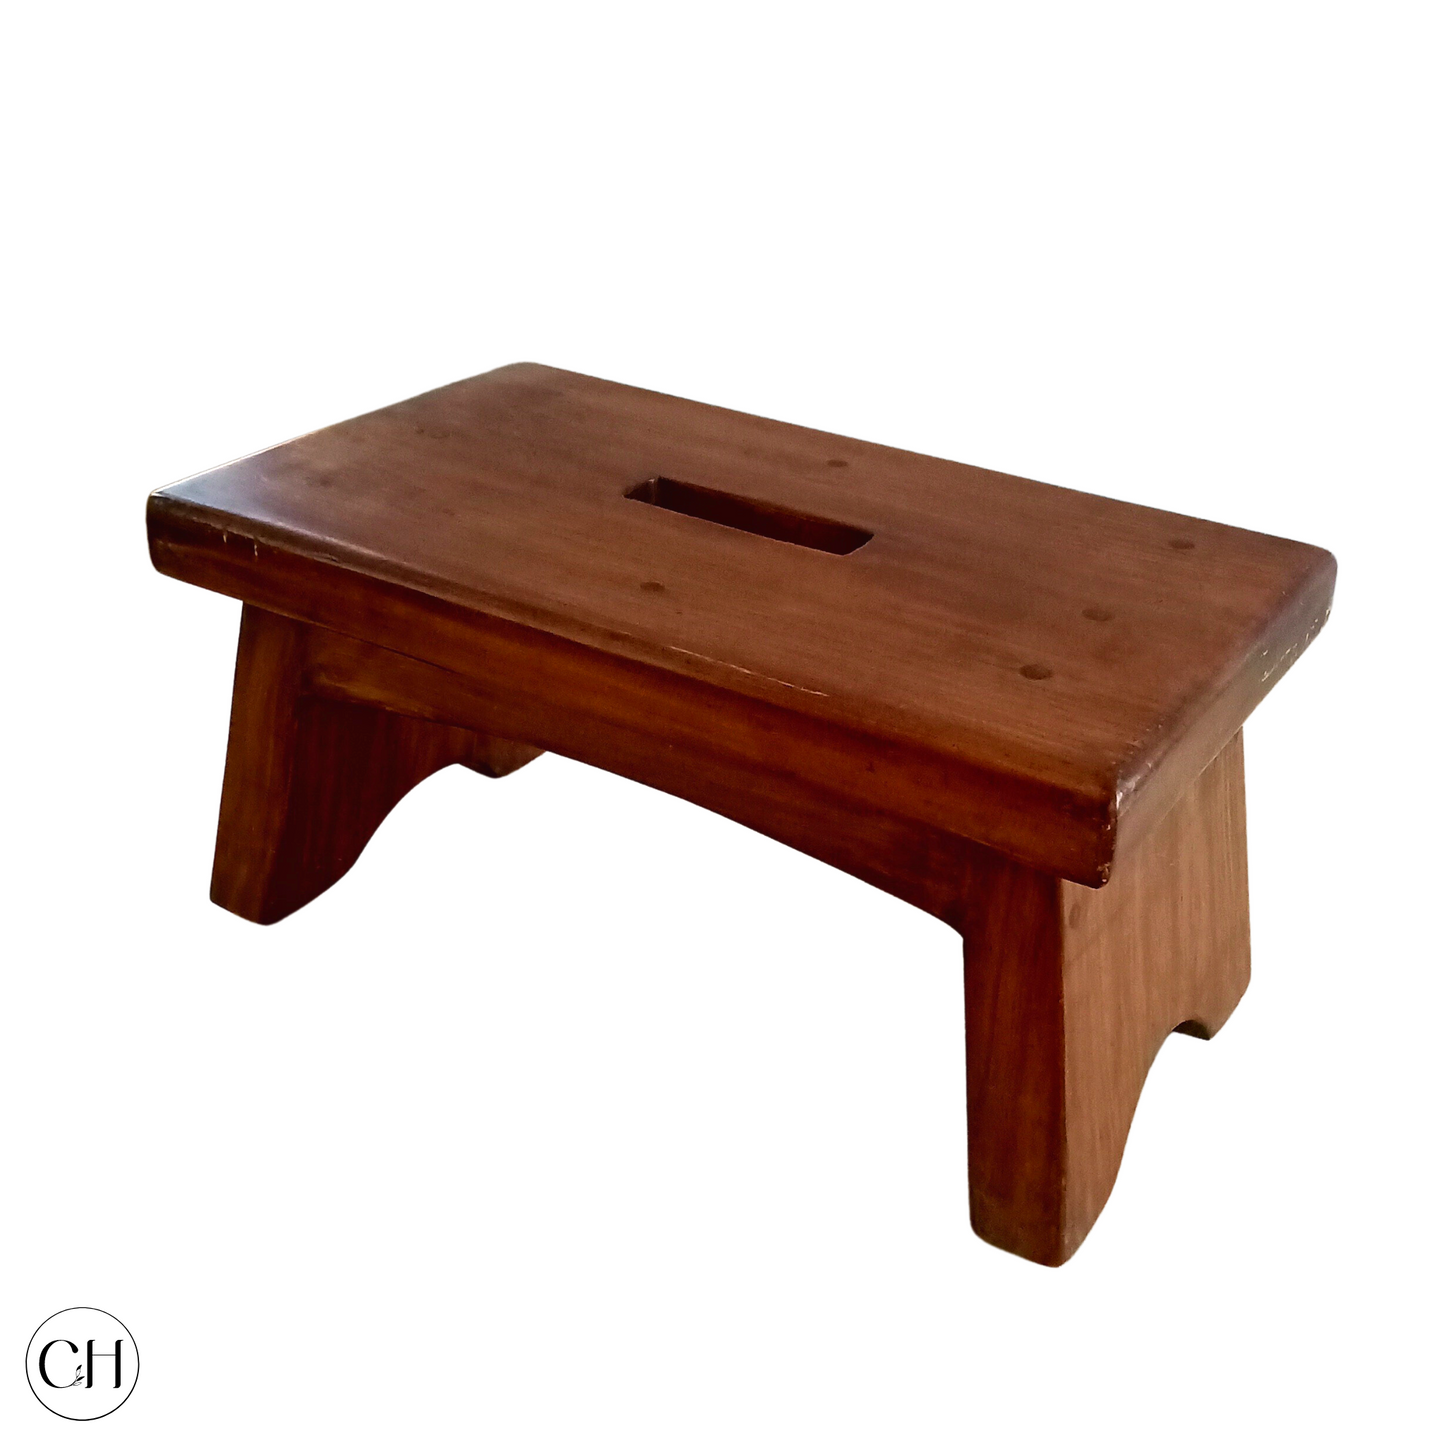 CustHum- Step - small wooden stool with groove in the middle for easy carrying (wood tone, white background)